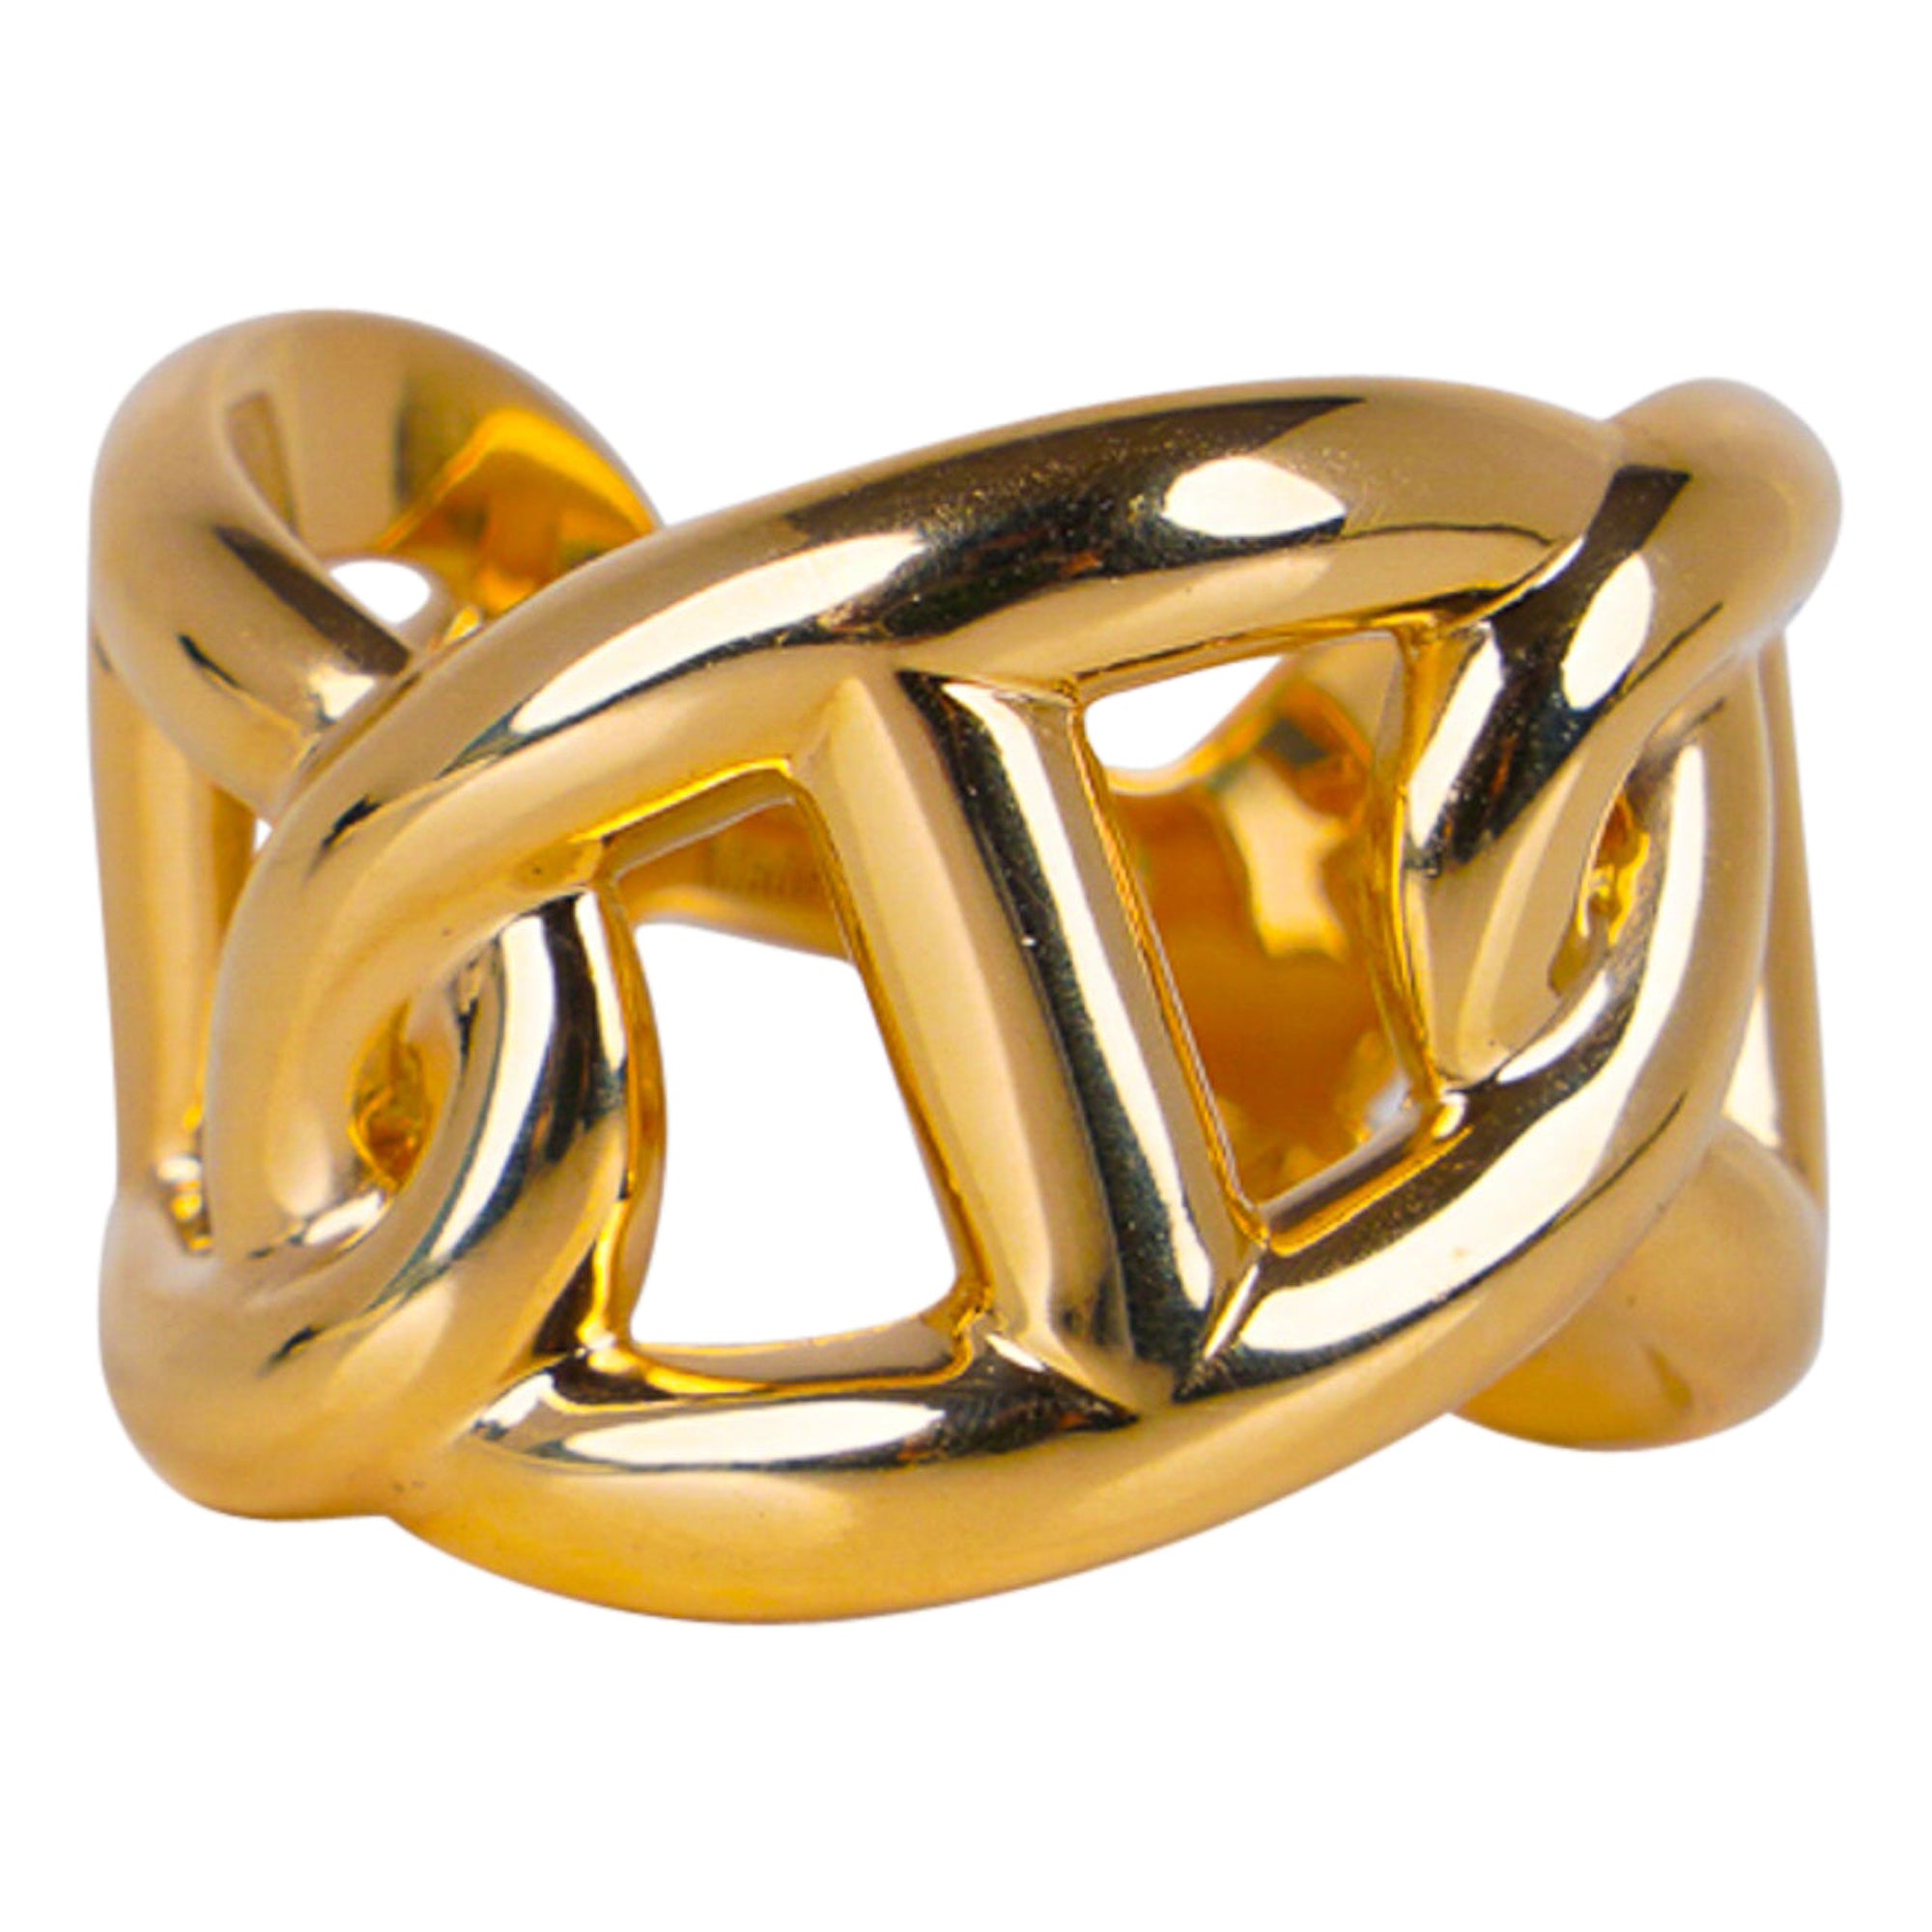 Hermes Ring 18k Yellow Gold Chaine D'Ancre